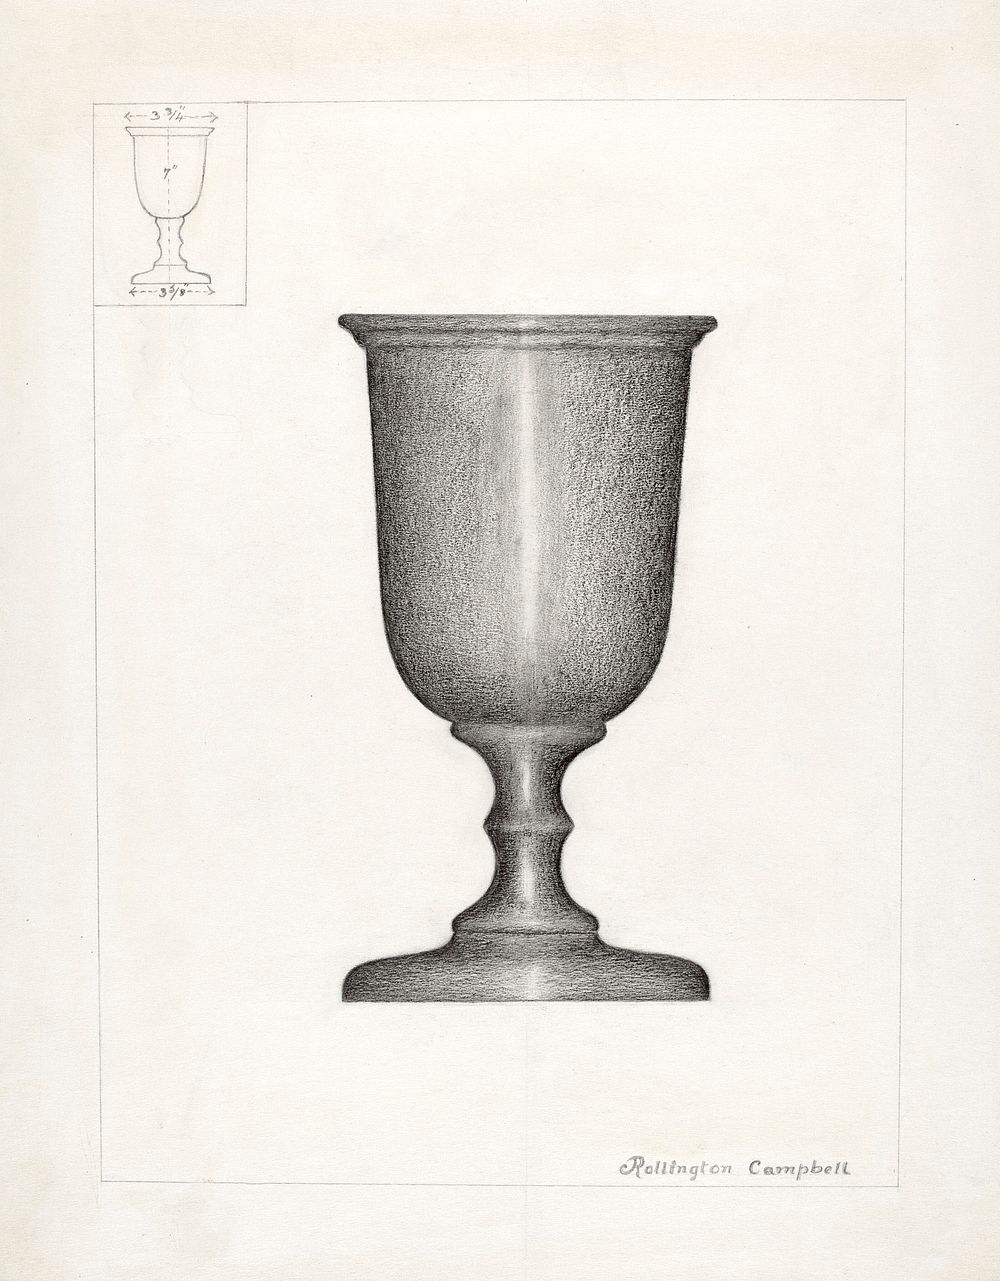 Pewter Cup (1935&ndash;1942)  by Rollington Campbell. Original from The National Gallery of Art. Digitally enhanced by…